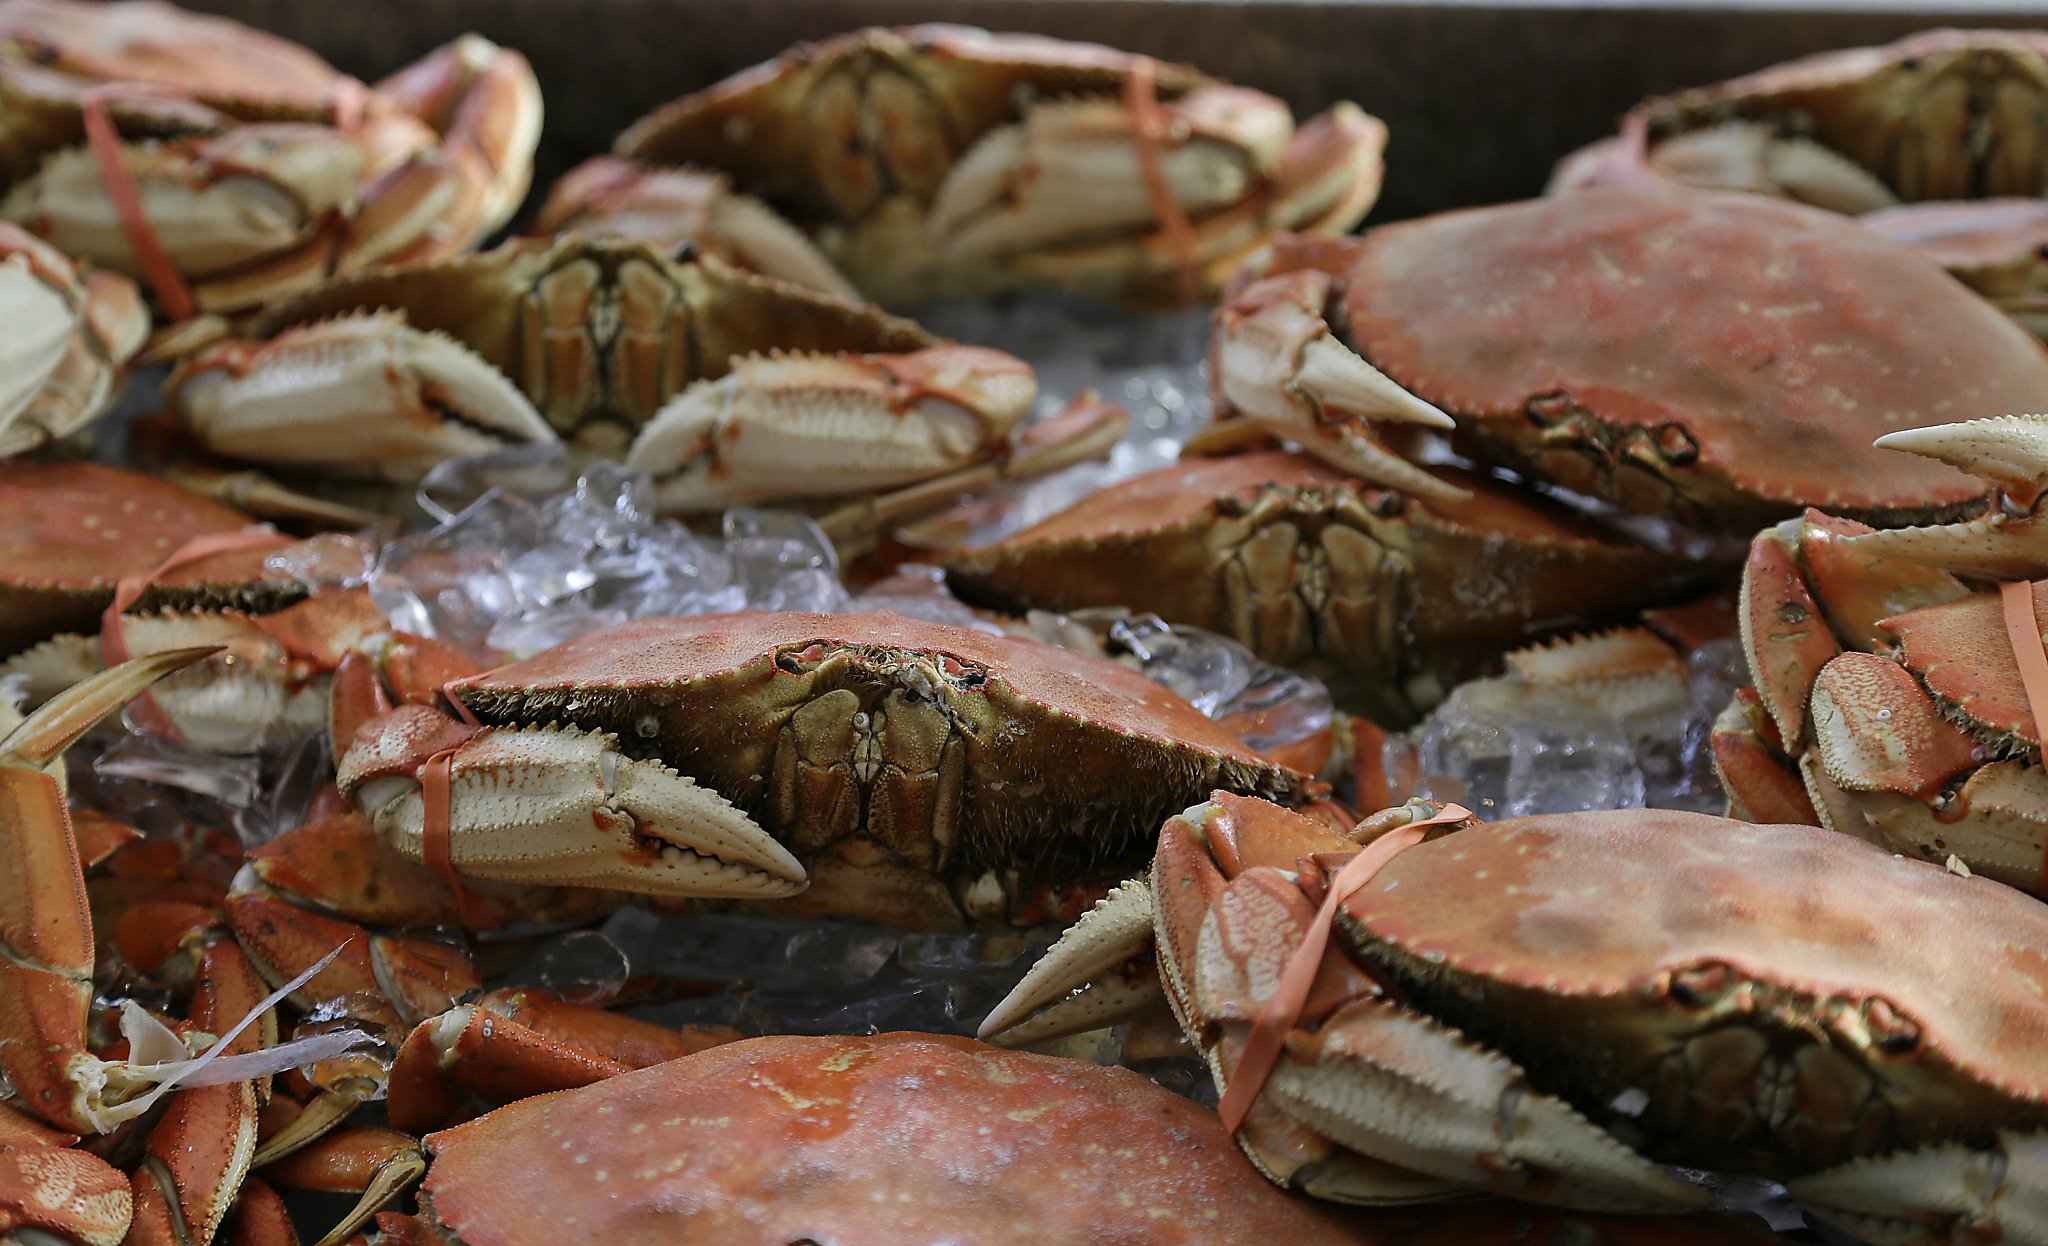 Consumers Warned To Avoid Eating Rock Crabs, Bivalve Shellfish - SFGate